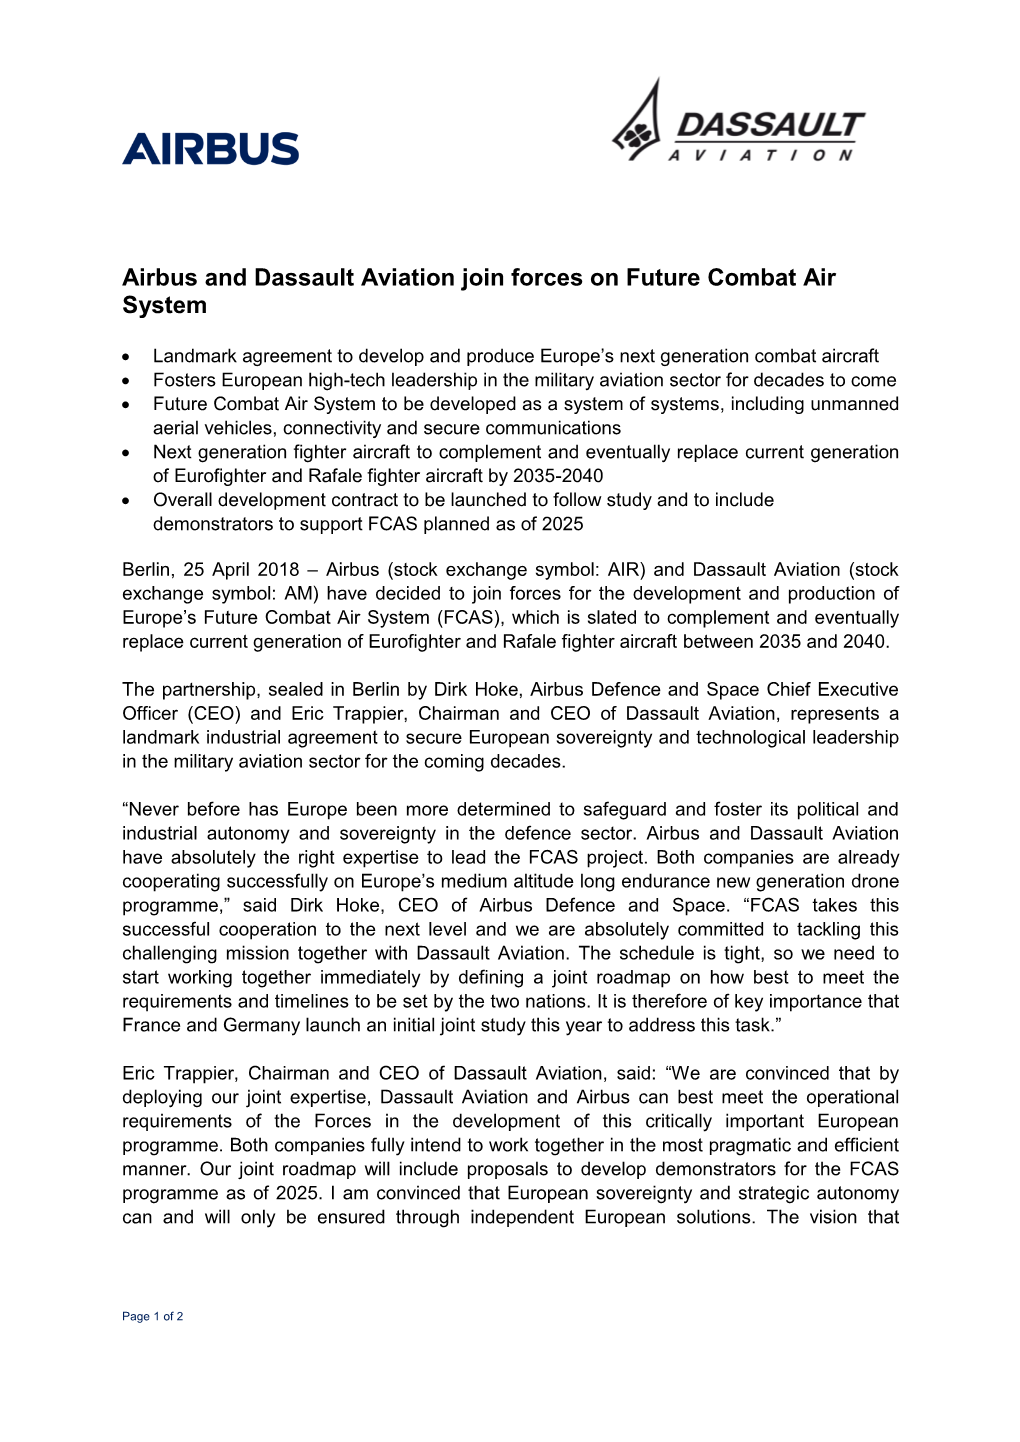 Airbus and Dassault Aviation Join Forces on Future Combat Air System